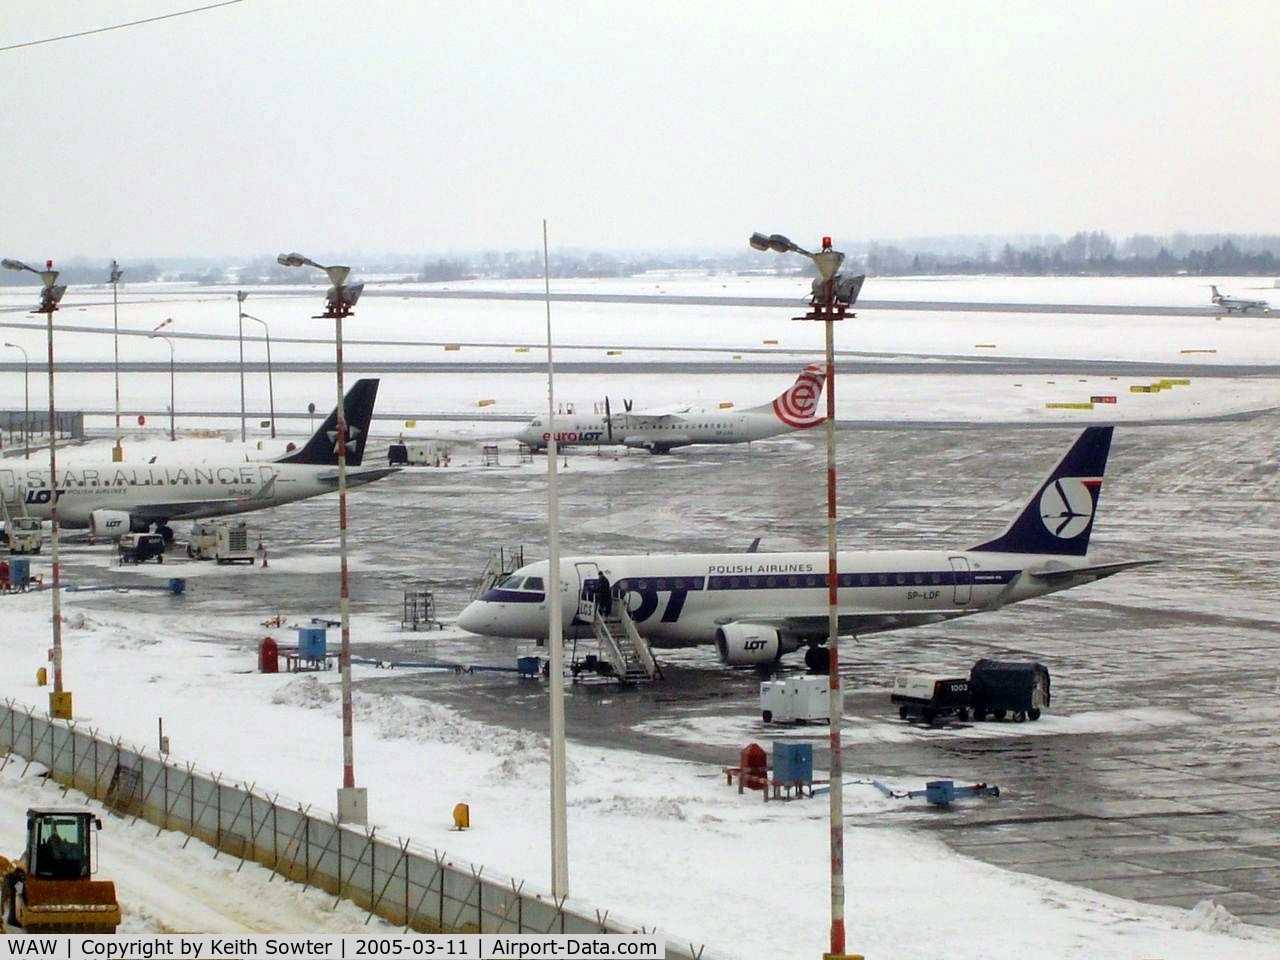 Warsaw Frederic Chopin Airport (formerly Okecie International Airport), Warsaw Poland (WAW) - View in the snow from the public viewing area